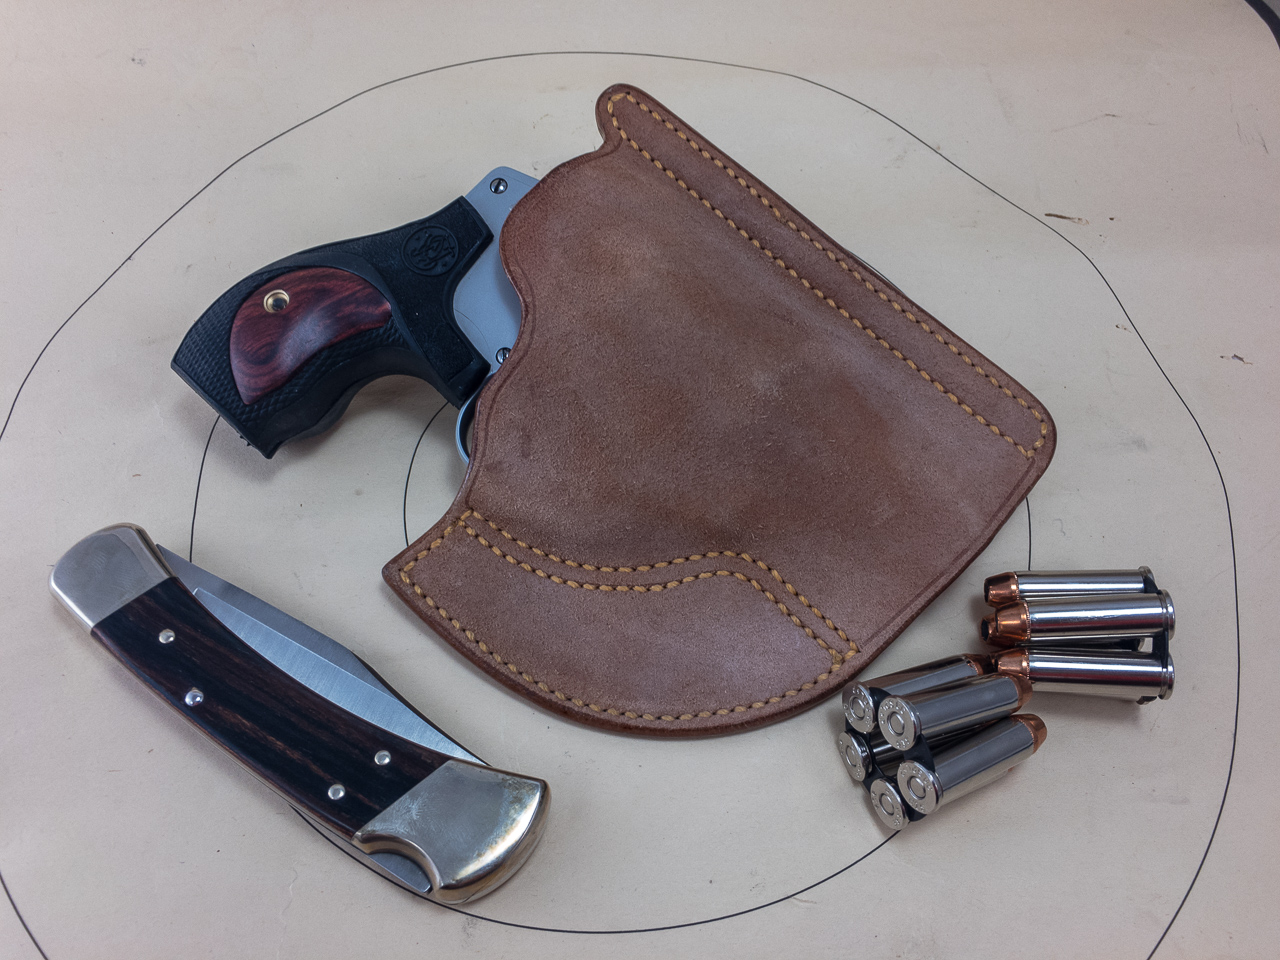 Even if you choose to pocket carry, you'll want a proper holster to protect the trigger and keep the gun oriented properly for a sure draw.